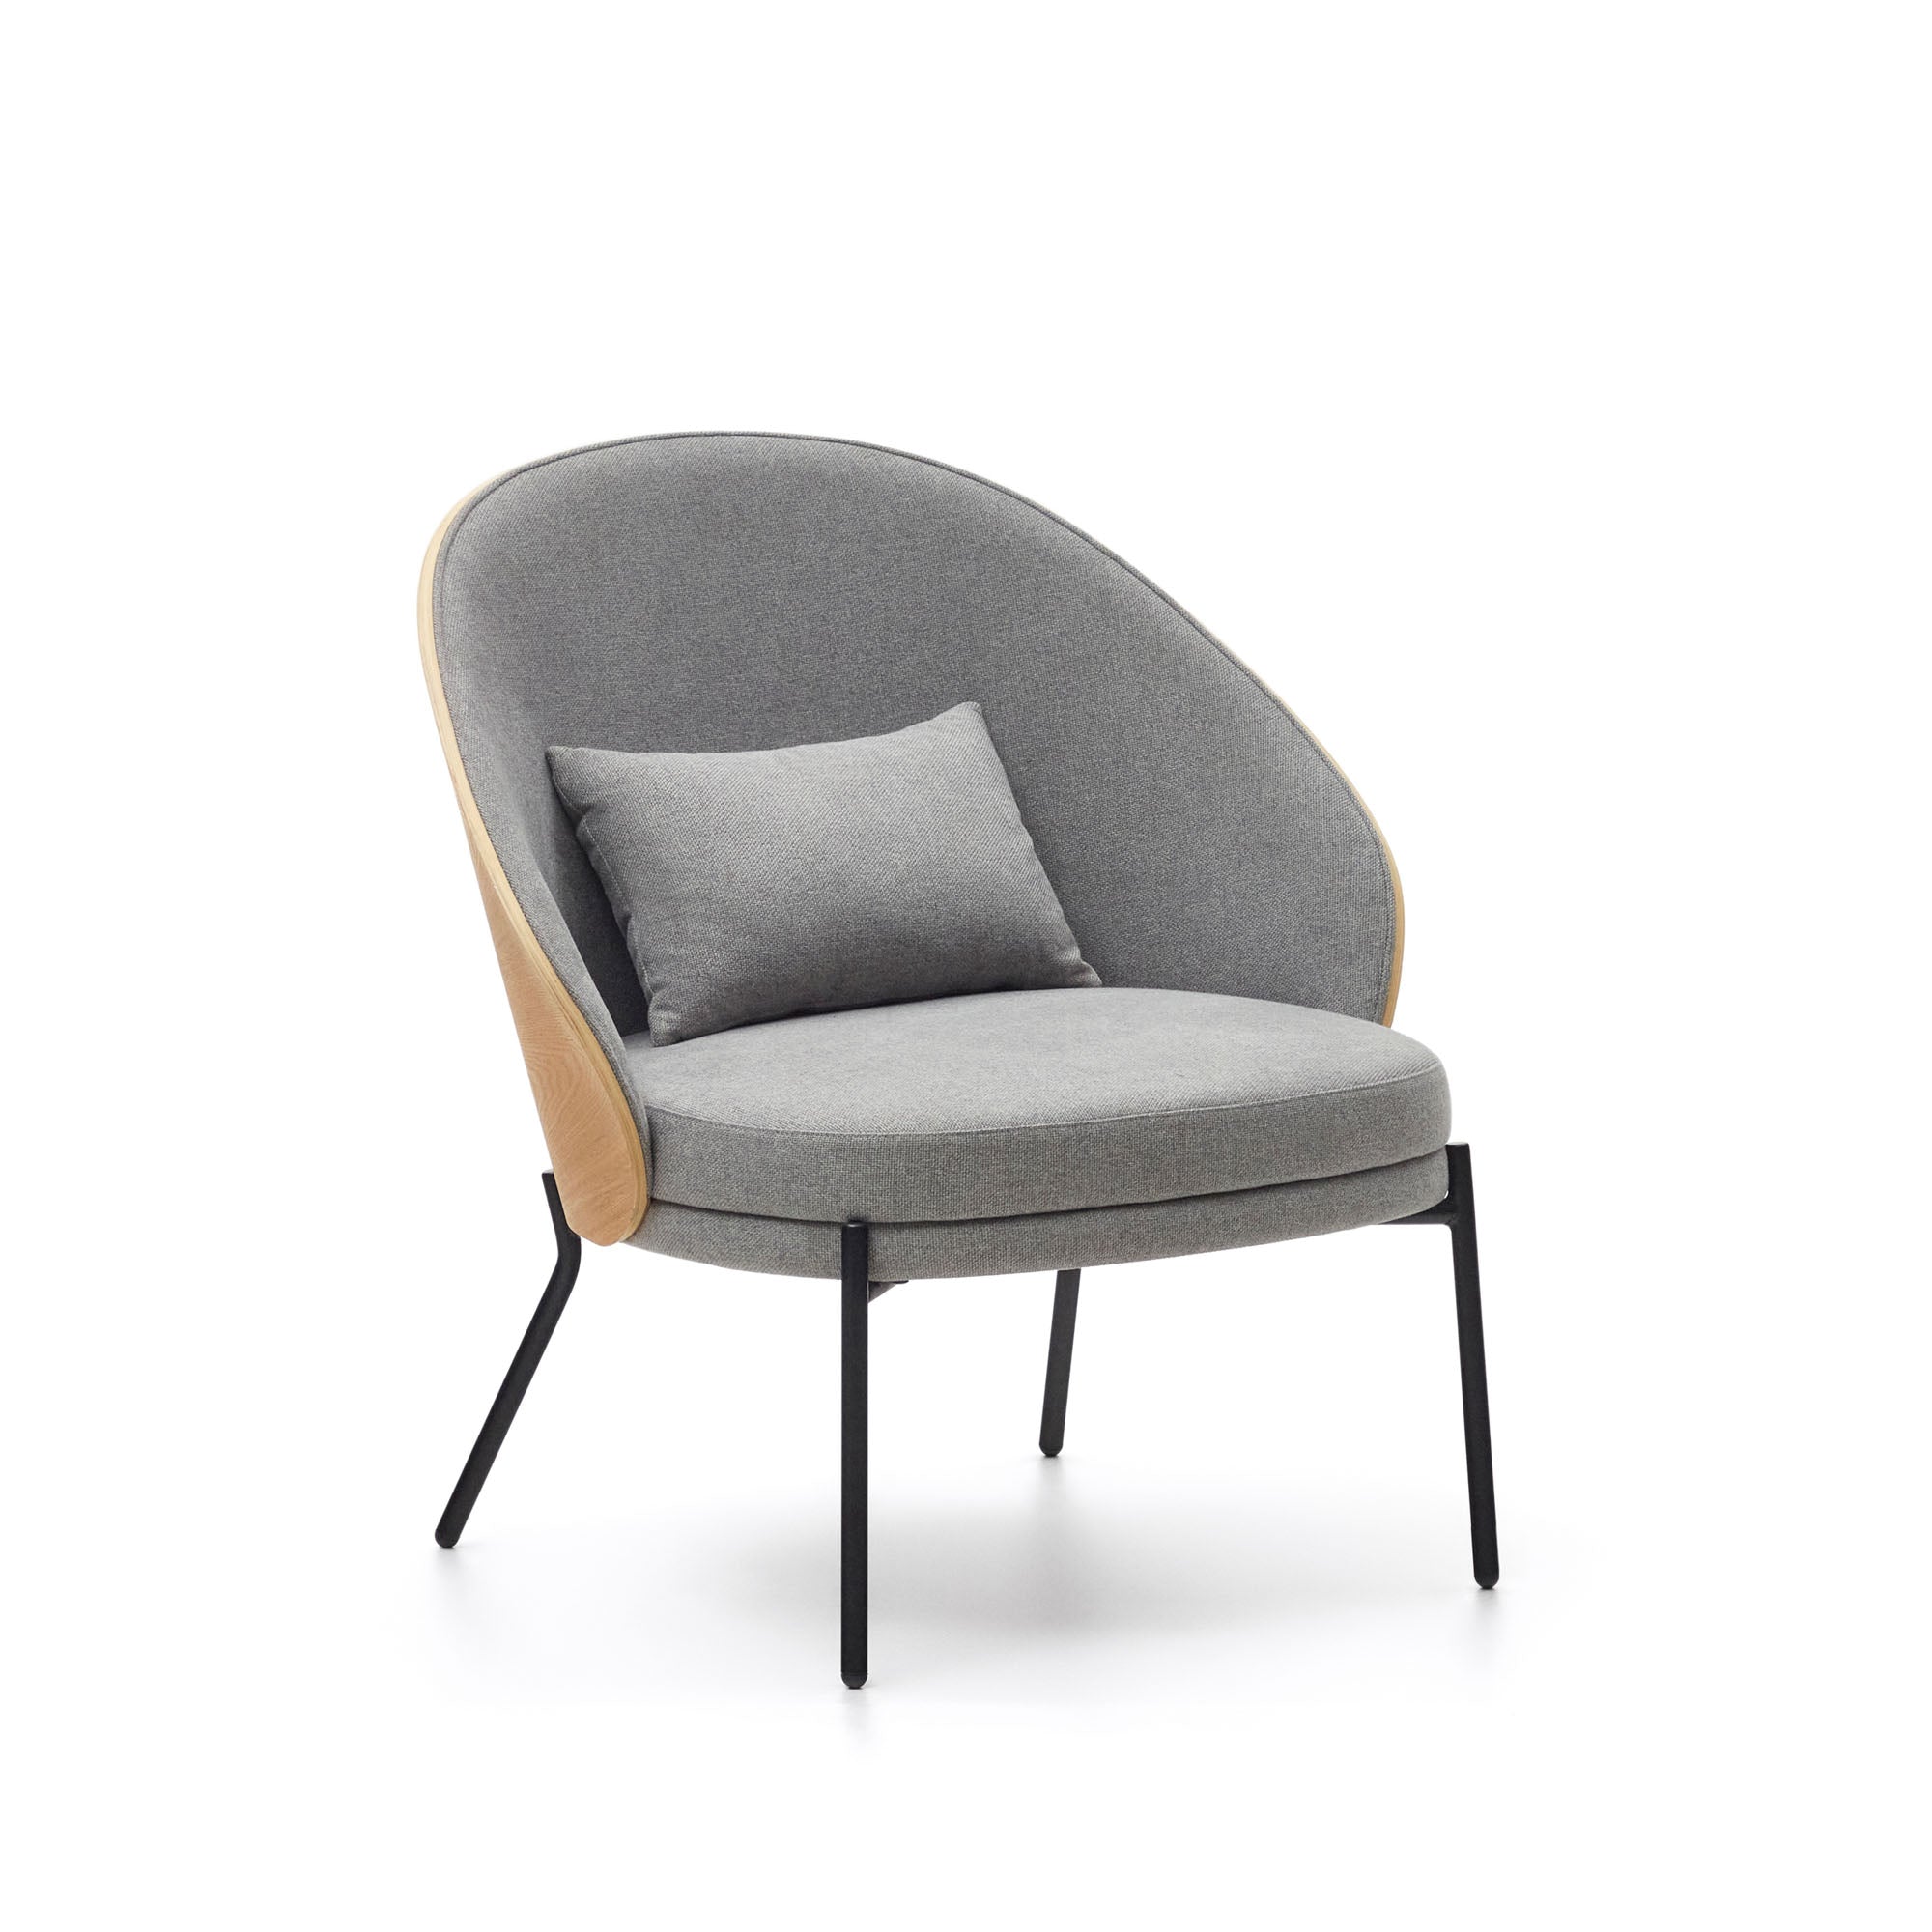 Eamy light grey armchair in an ash wood veneer with a natural finish and black metal